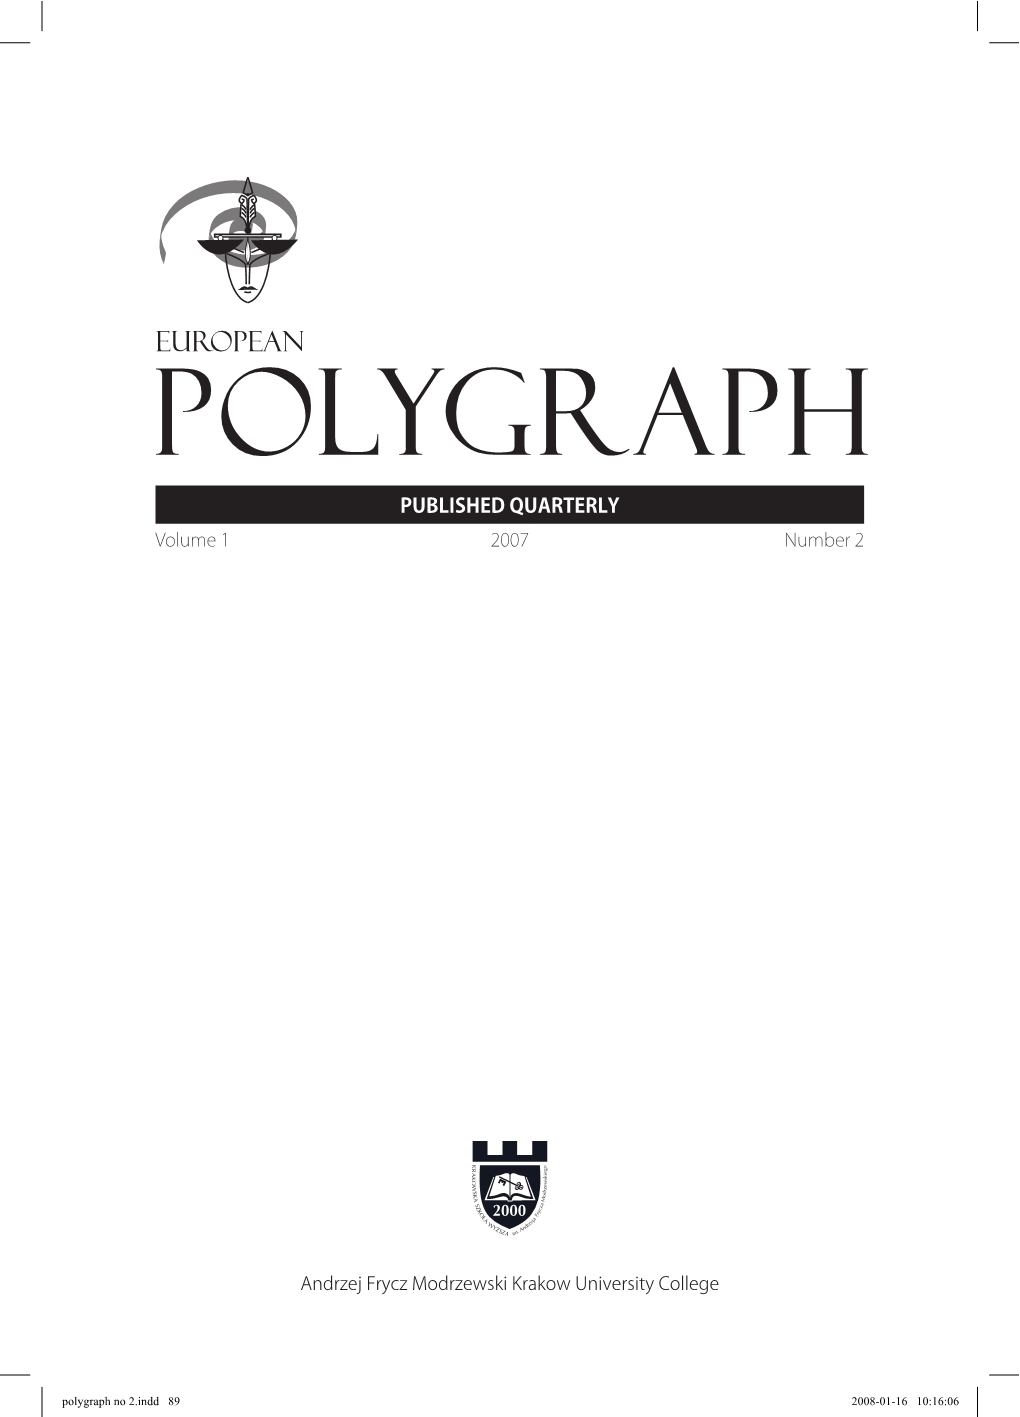 Jaworski, Ryszard (2006) Situational sequencing tests in polygraph examination(s) Cover Image